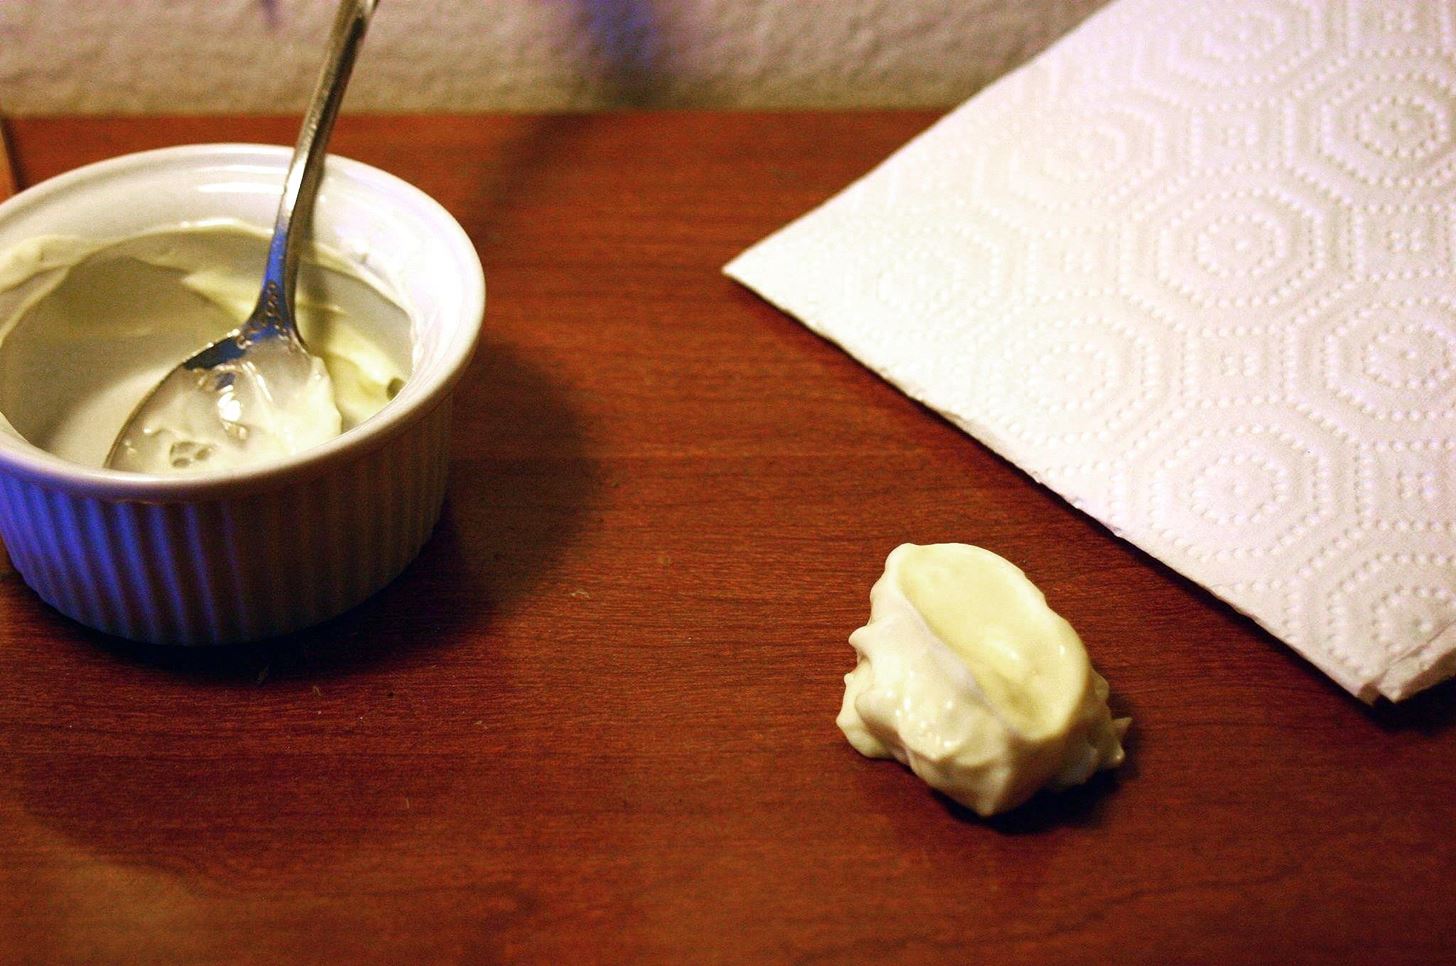 Mayo to the Rescue: 10 Unexpected Non-Food Uses for Mayonnaise